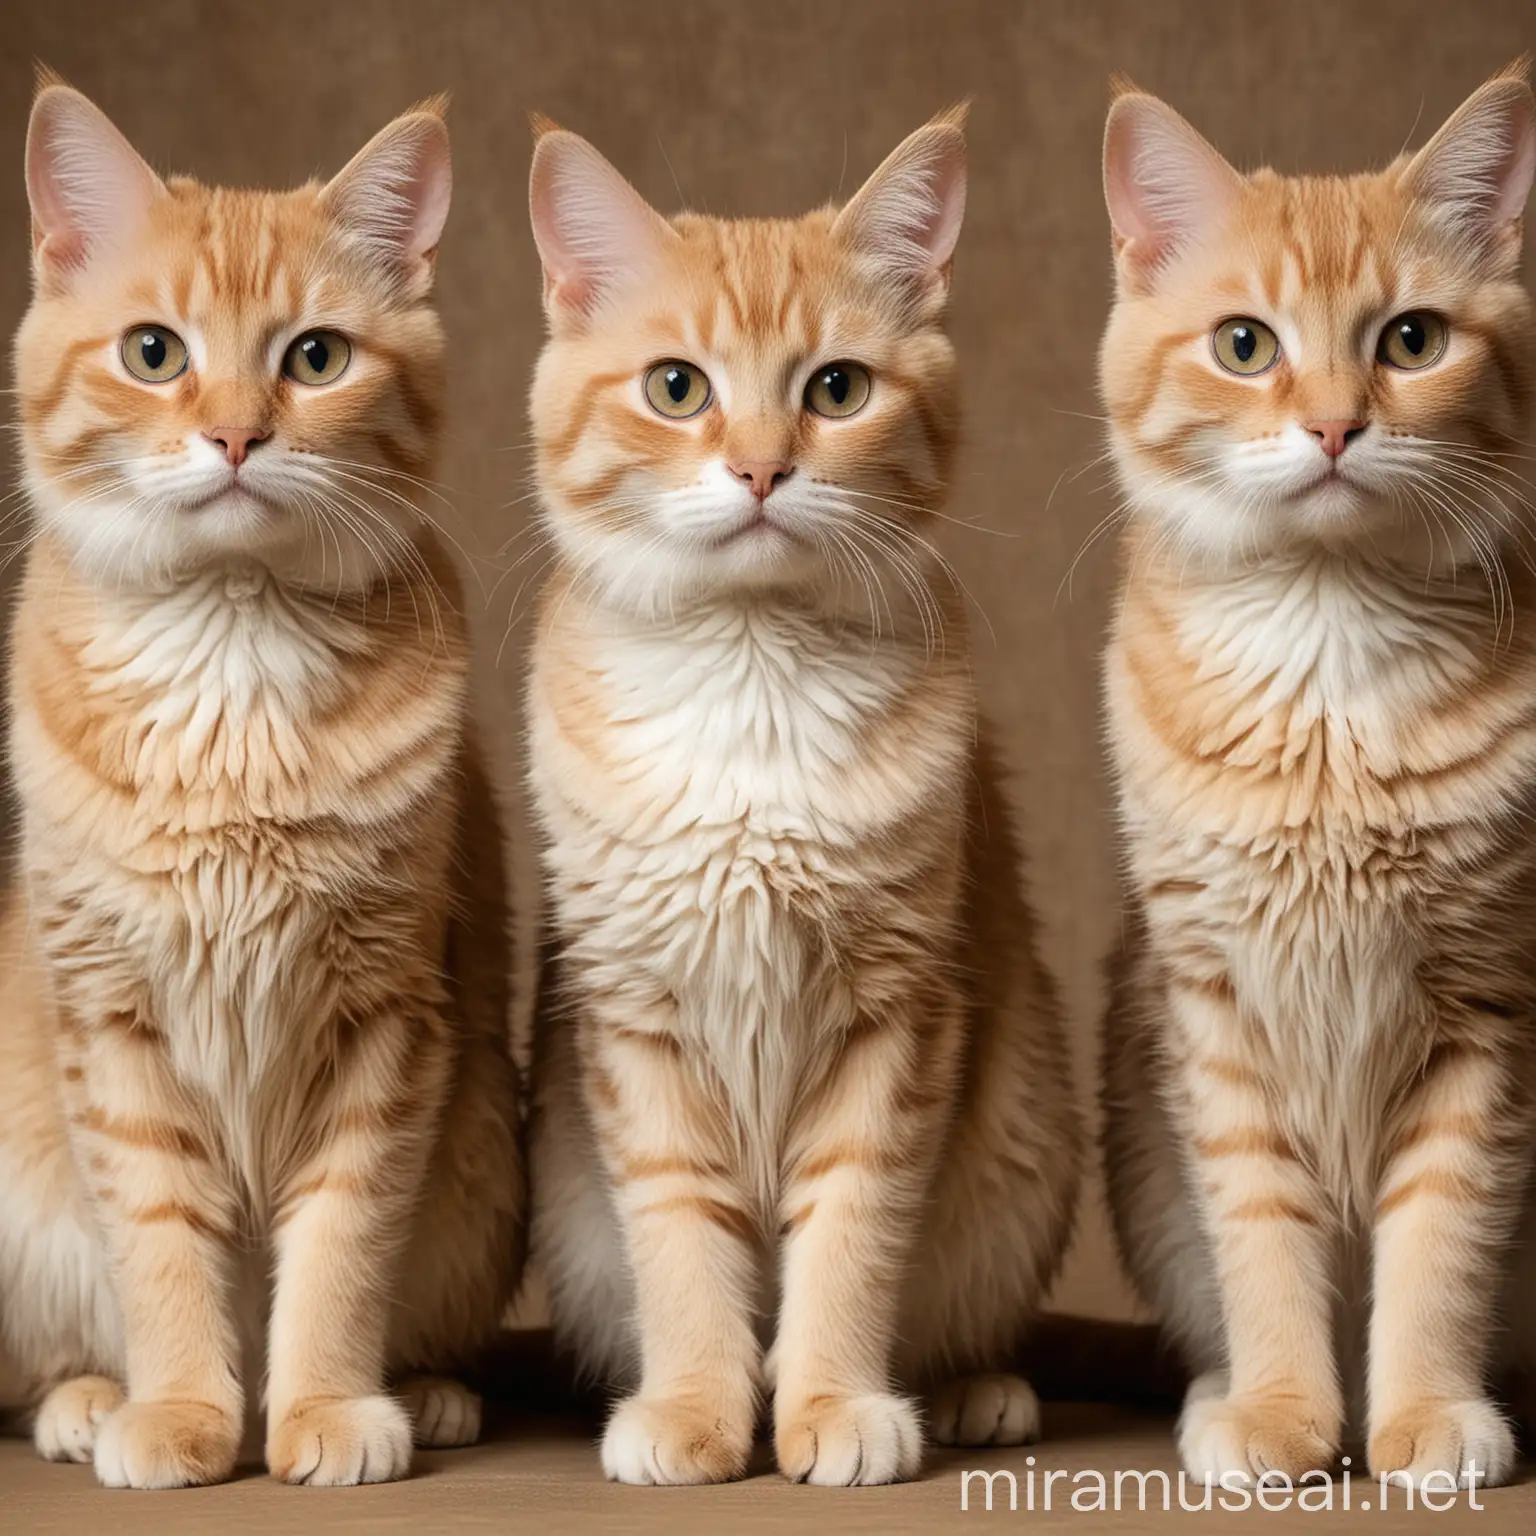 Multiple Identical Cats of Various Ages Sitting Together